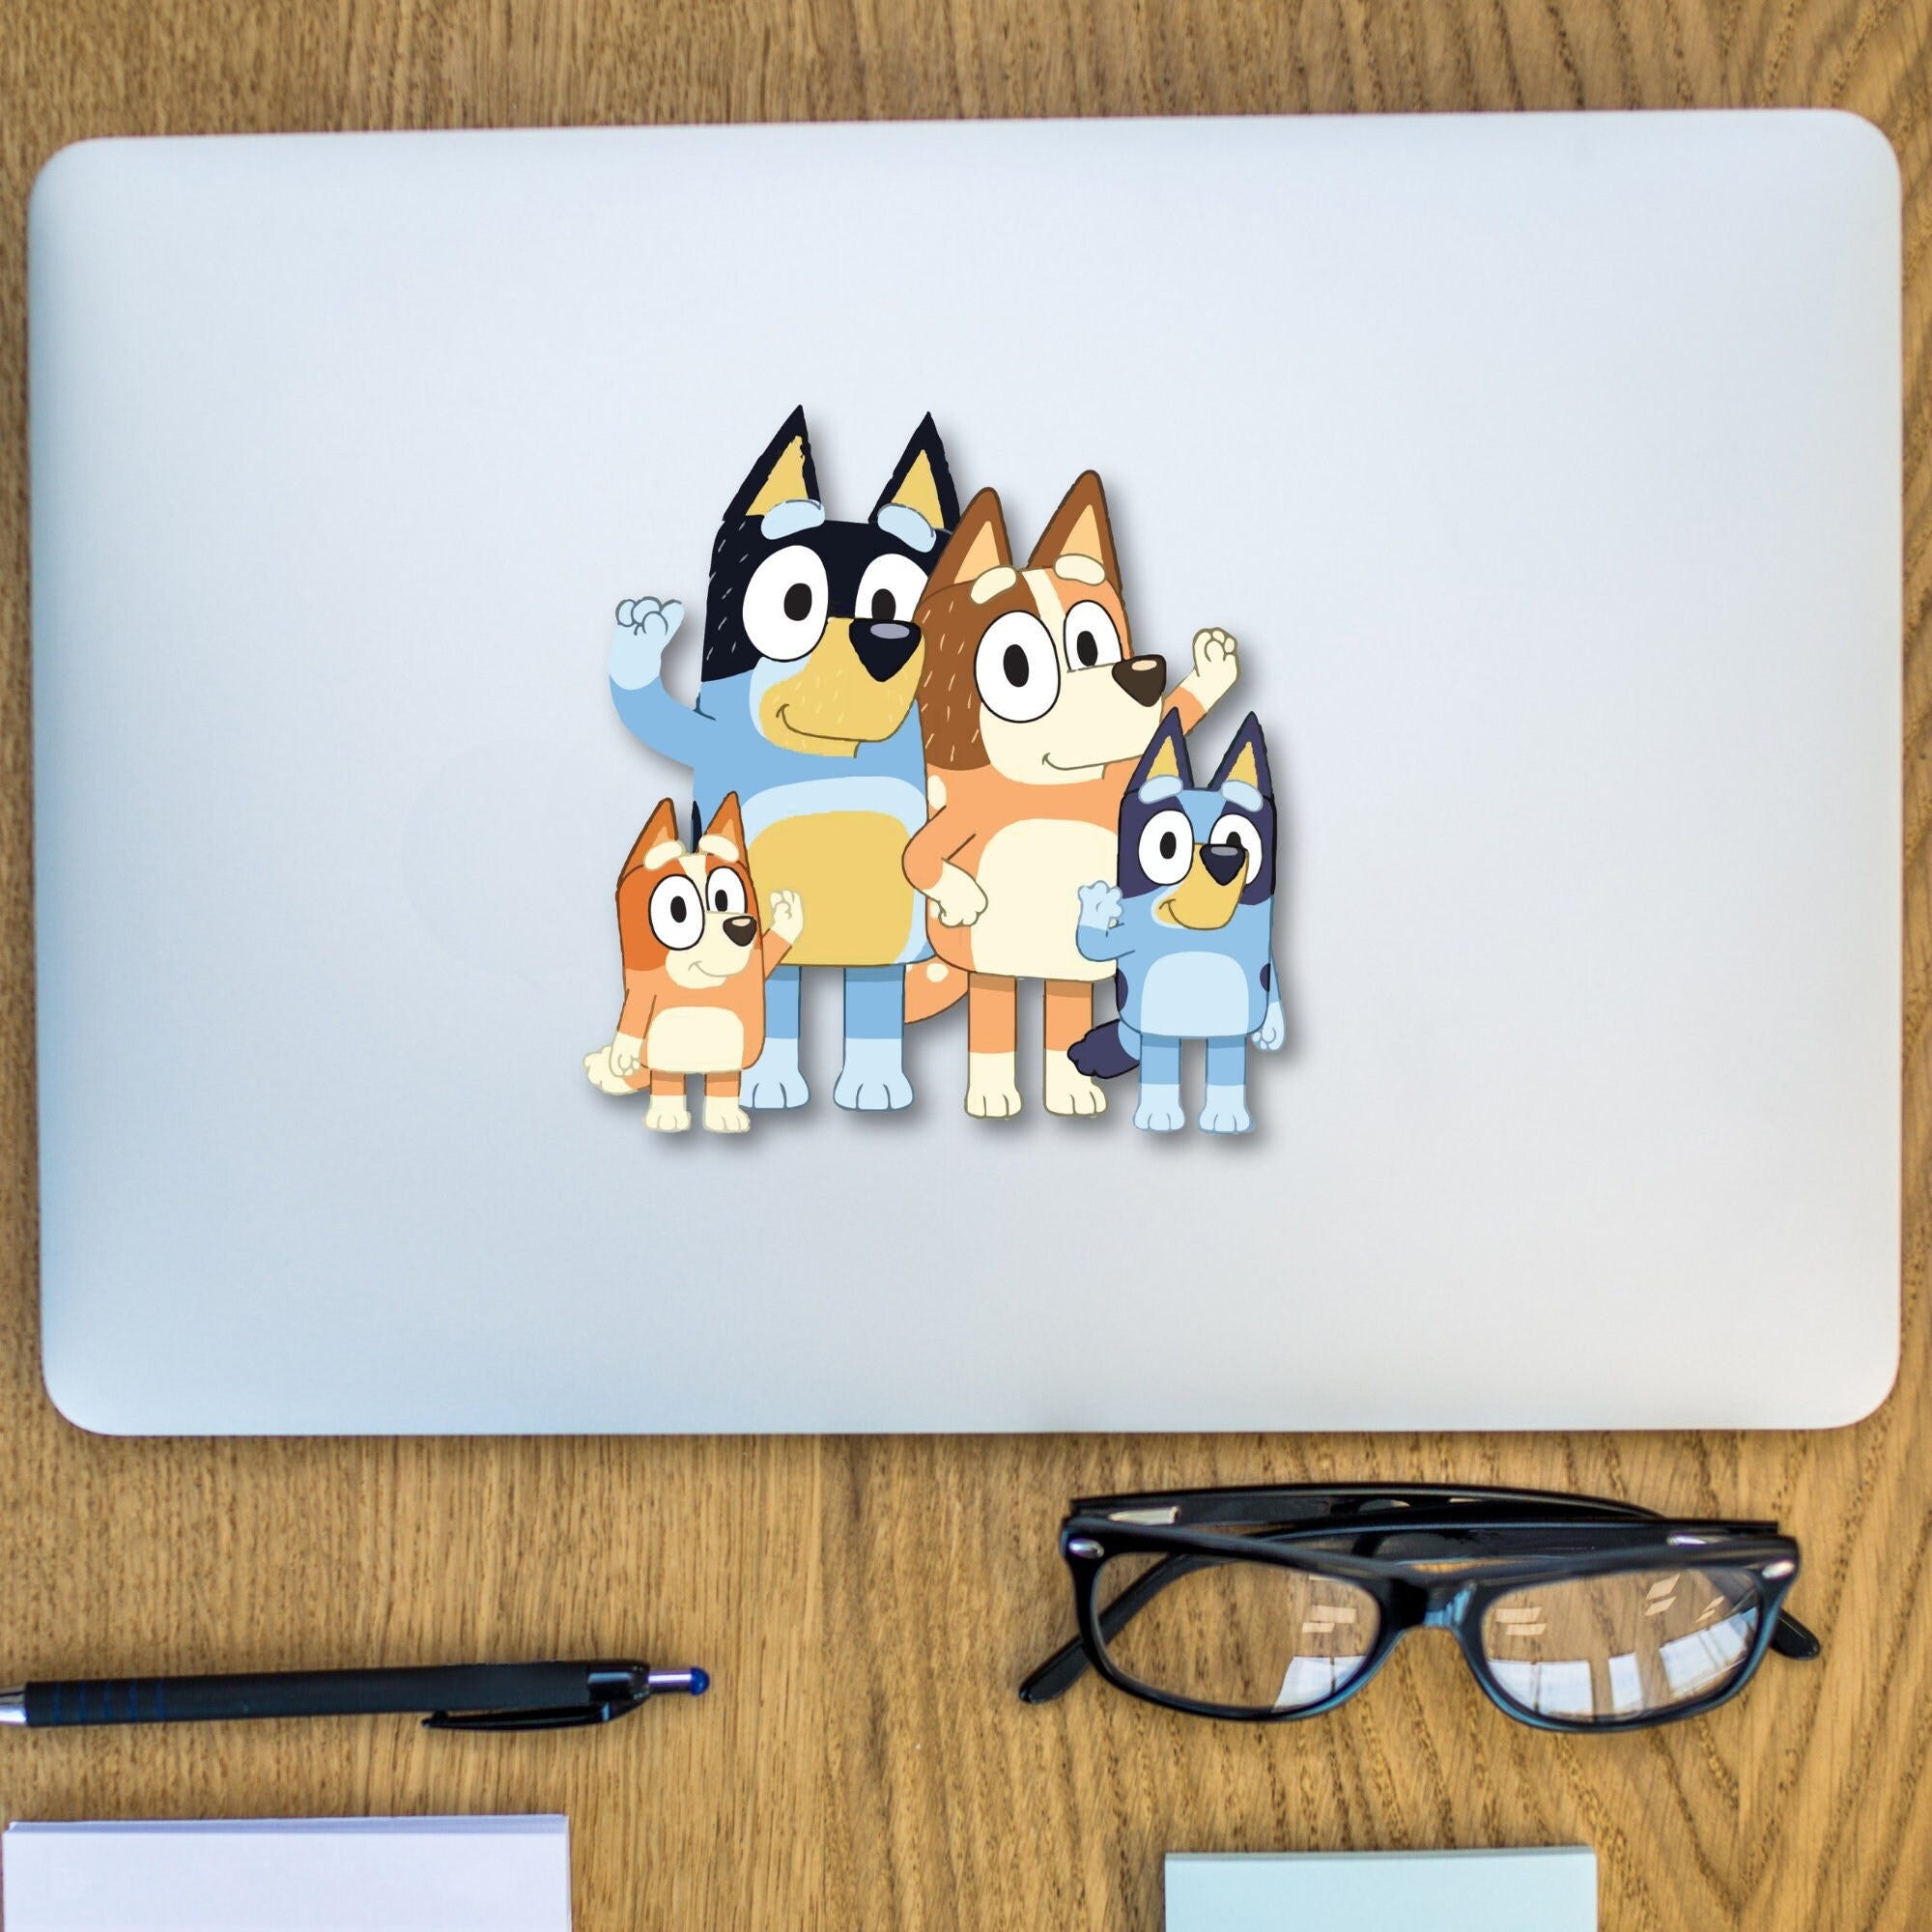 Dog Family Stickers, Waving Dog Family Decal, Funny Decals, Laptop Decal, Car Sticker, Lunch Box Sticker, Water Bottle Sticker, Kids Sticker